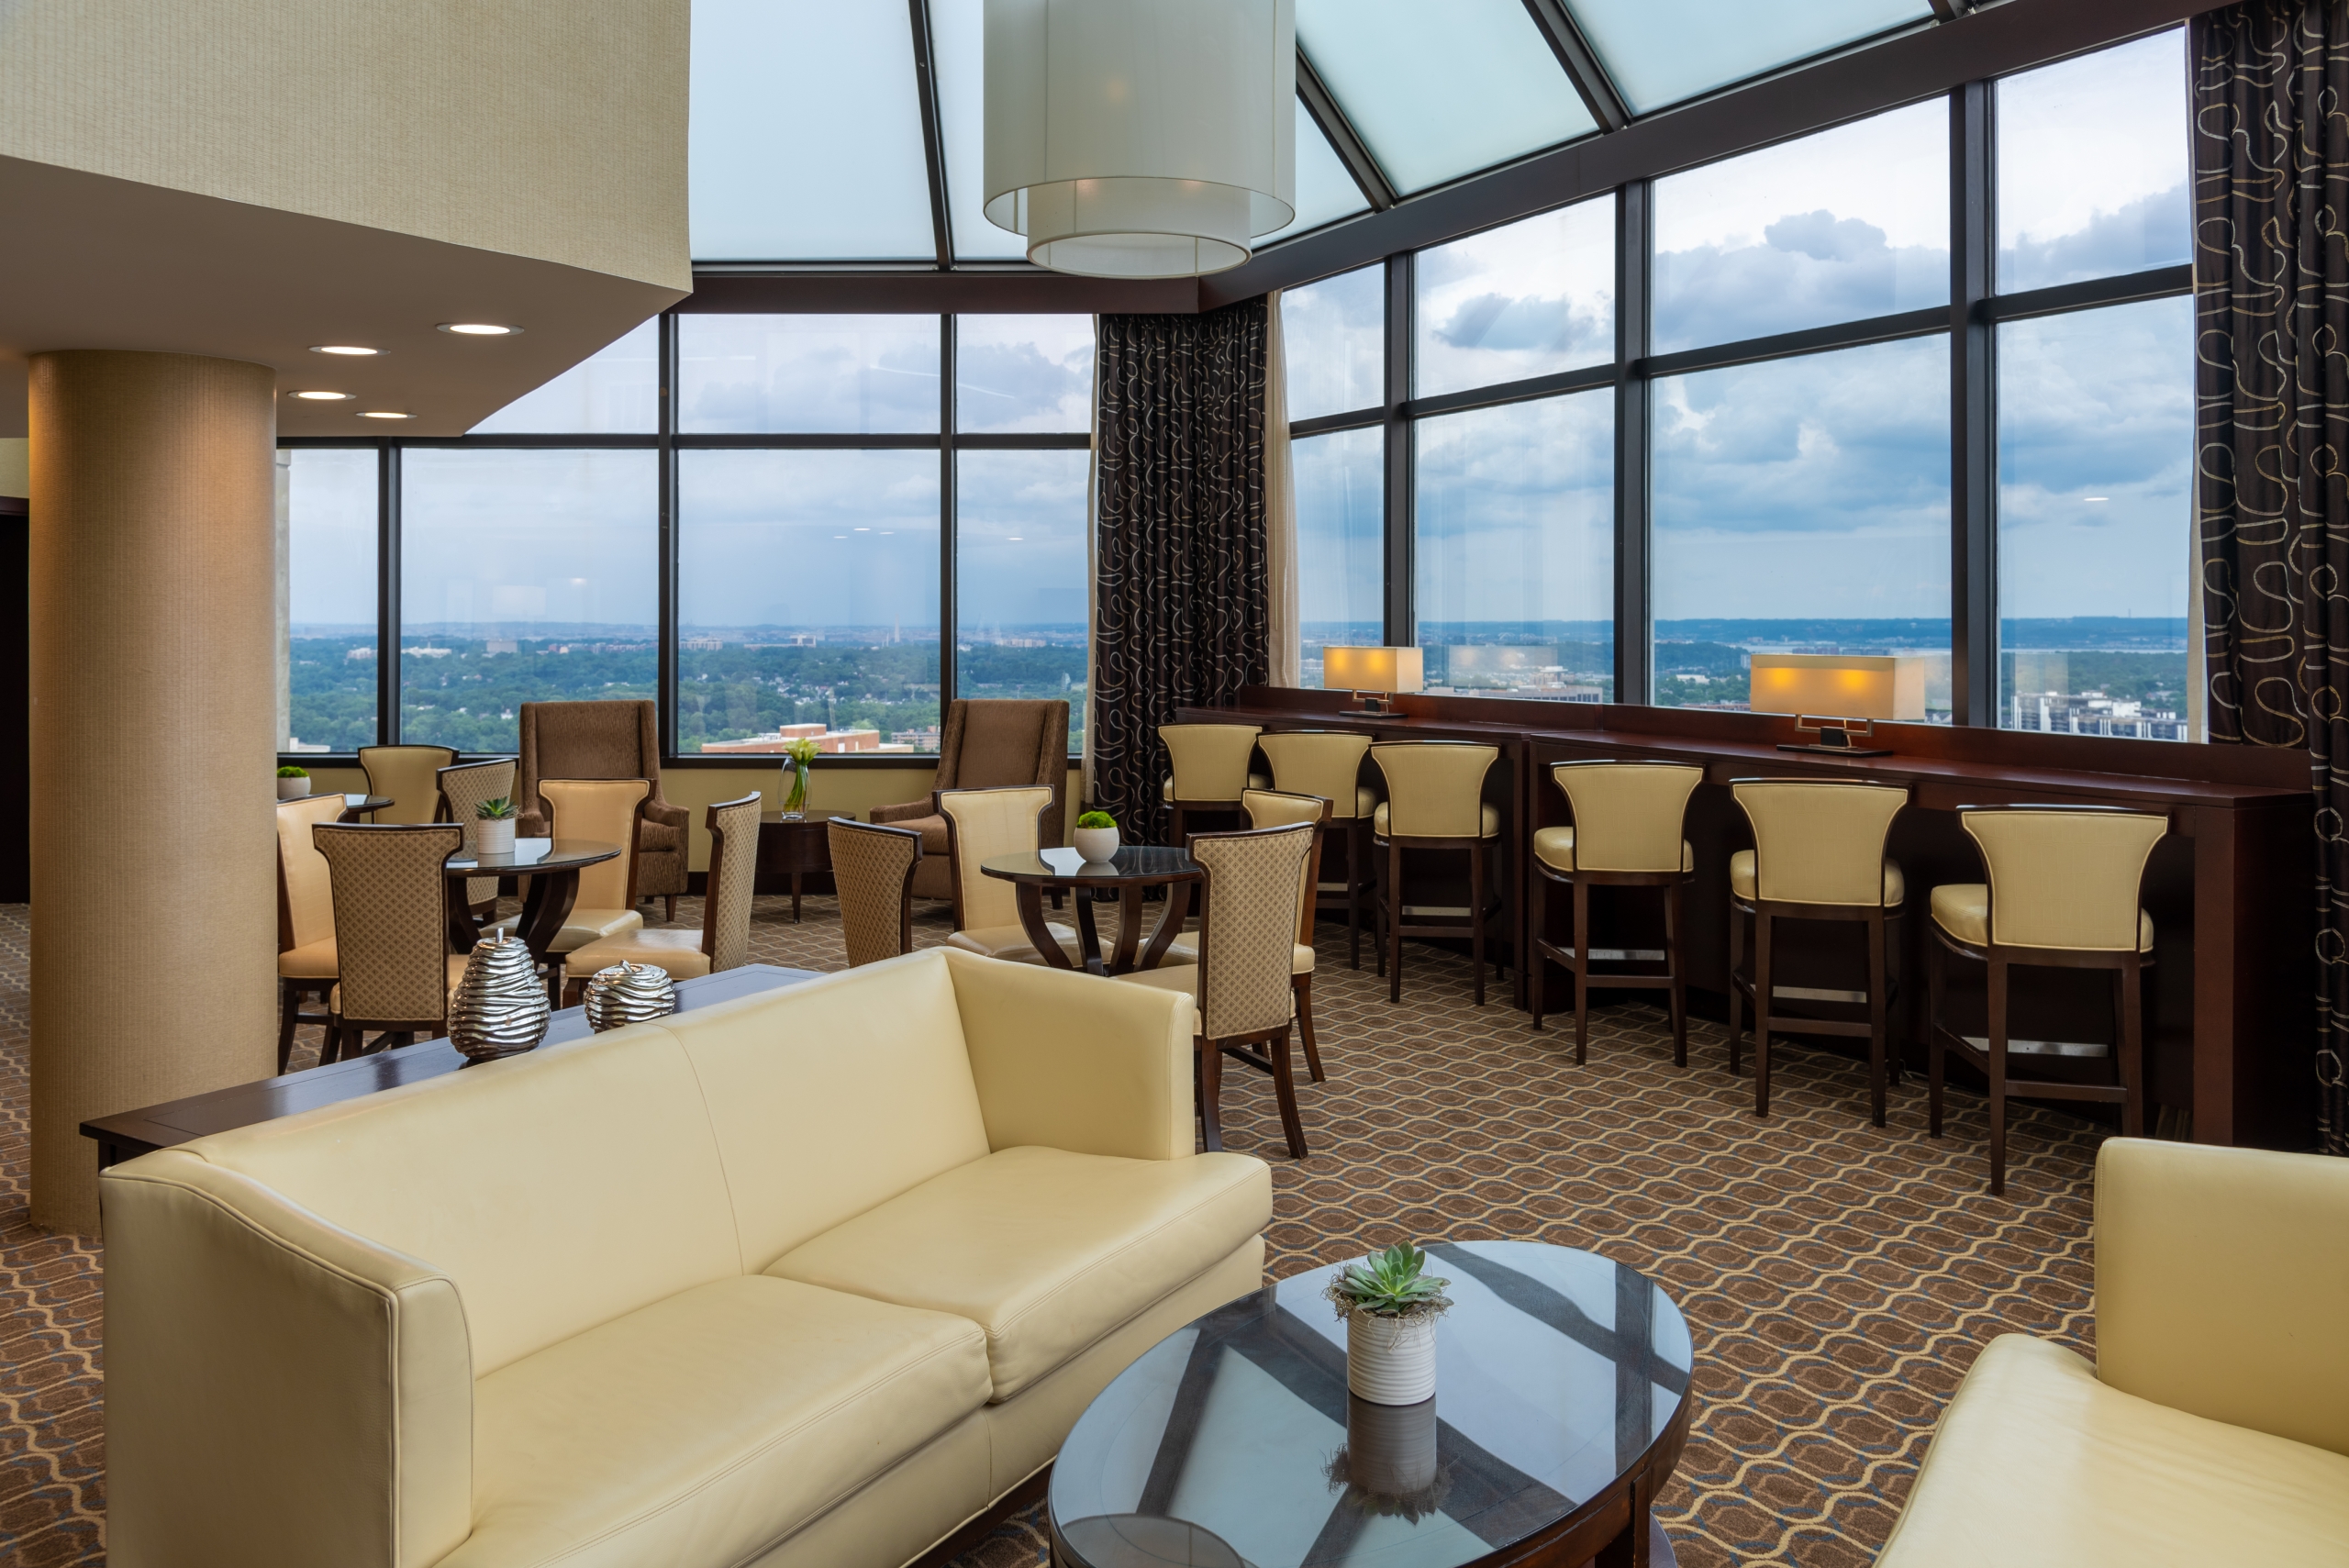 The dining restaurant at Hilton Alexandria Mark Center. The restaurant has large windows that overlook the city.